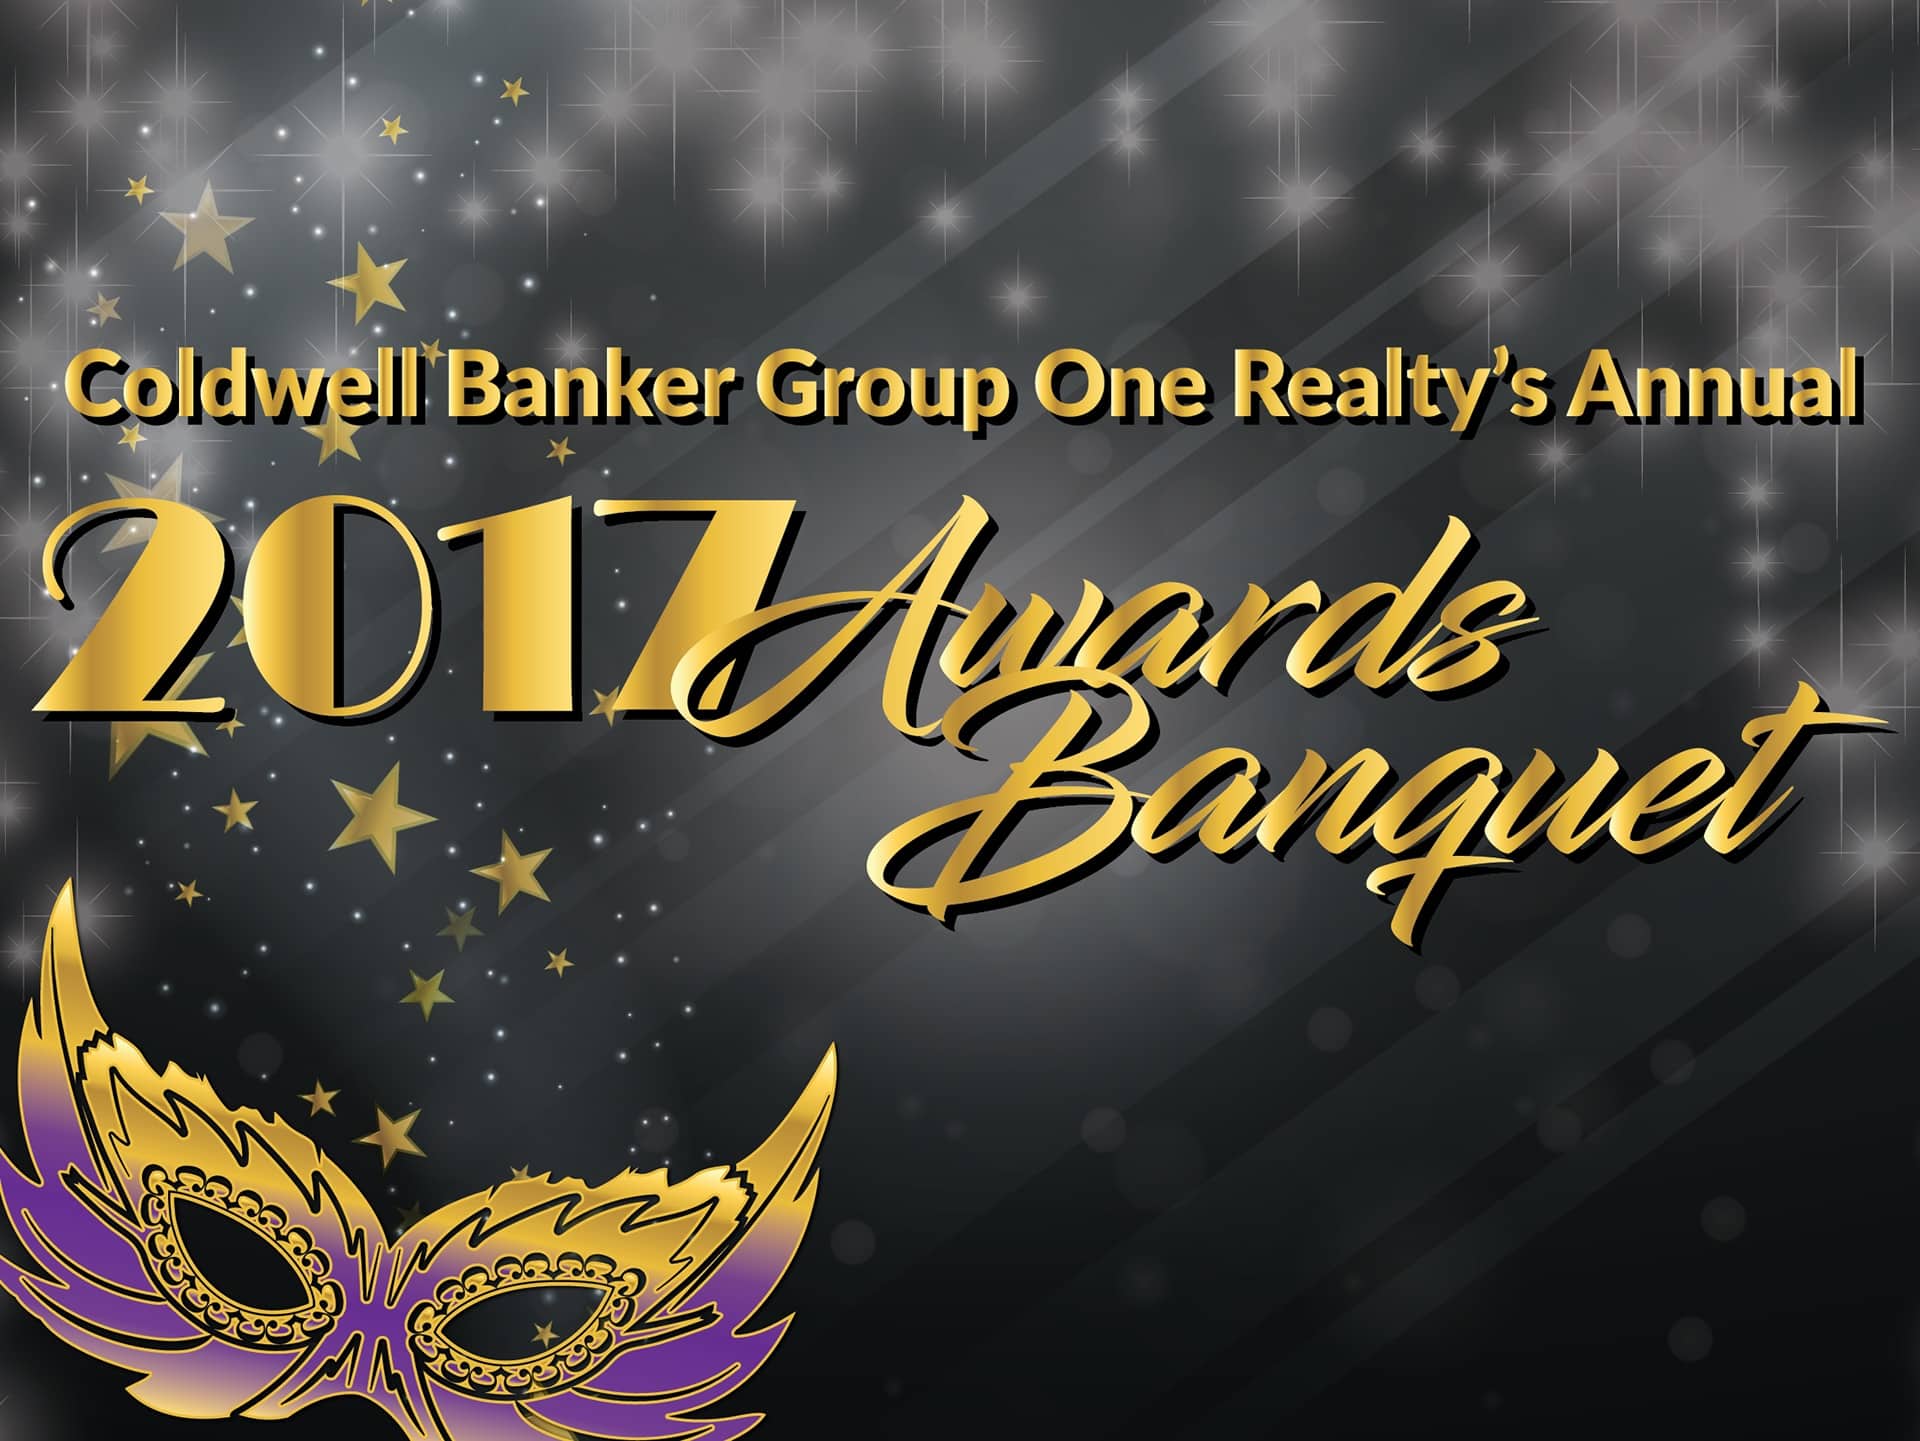 Coldwell Banker Group One Realty 2017 awards banquet powerpoint slide cover